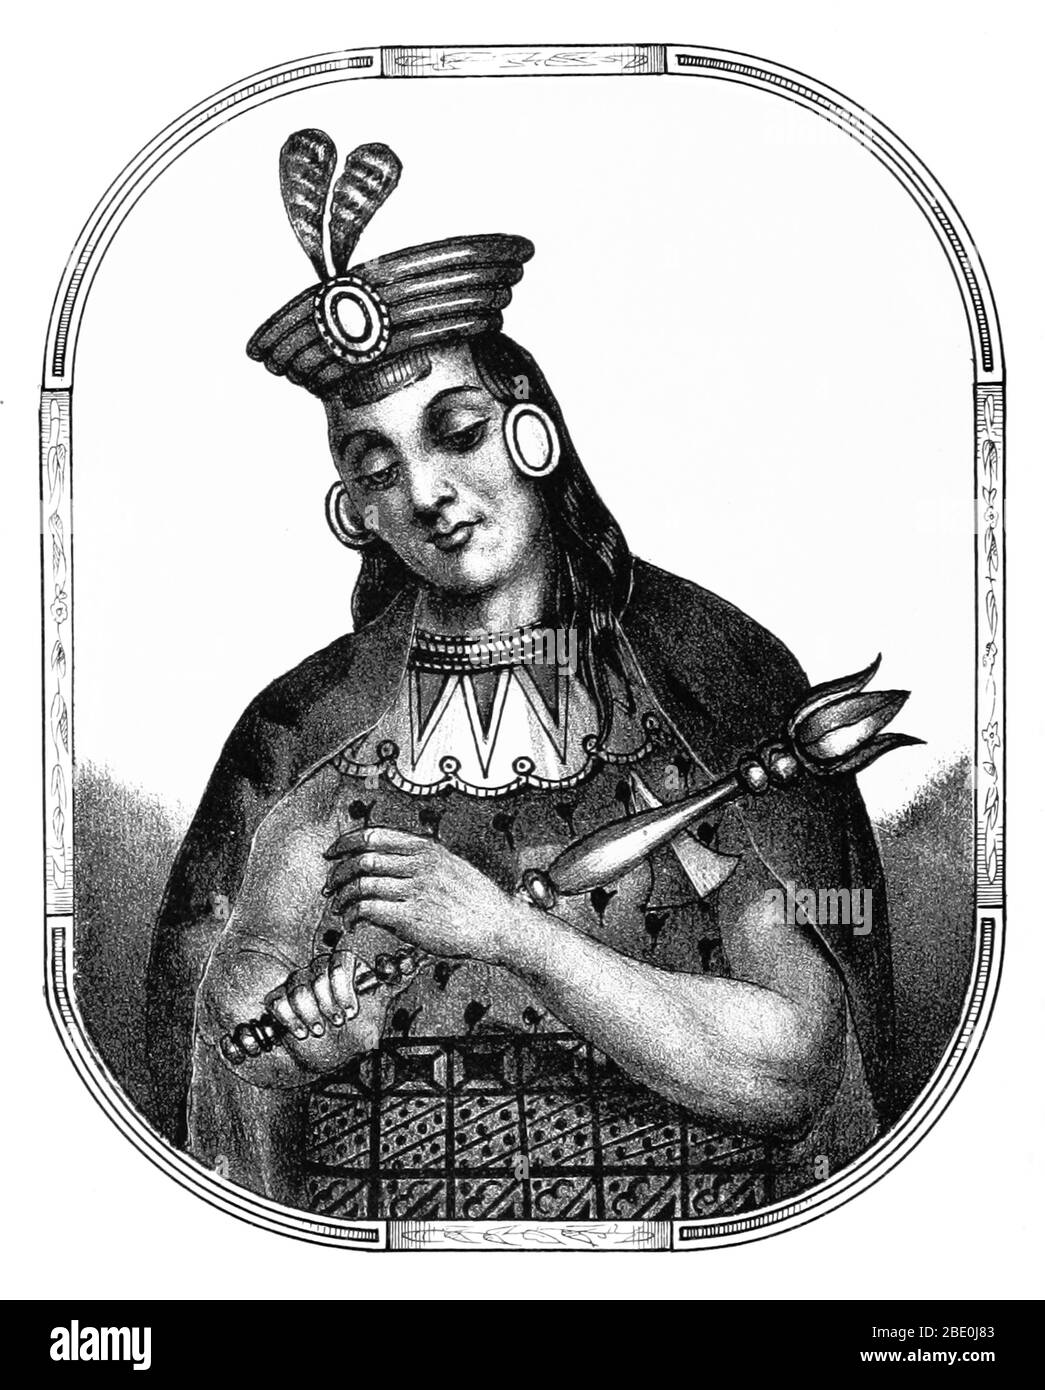 Yawar Waqaq was the seventh Sapa Inca of the Kingdom of Cuzco (beginning around 1380) and the second of the Hanan dynasty. His name refers to a story that he was abducted as a child by the Ayarmaca Sinchi Tocay Ccapac, crying tears of blood over his predicament. He eventually escaped with the help of one of his captor's mistresses, Chimpu Orma. Assuming the reign at the age of 19, Yawar conquered Pillauya, Choyca, Yuco, Chillincay, Taocamarca and Cavinas. Image taken from page 72 of 'Recuerdos de la Monarquia Peruana, ó bosquejo de la historia de los Incas, etc' by Justo Sahuaraura, 1850. Stock Photo